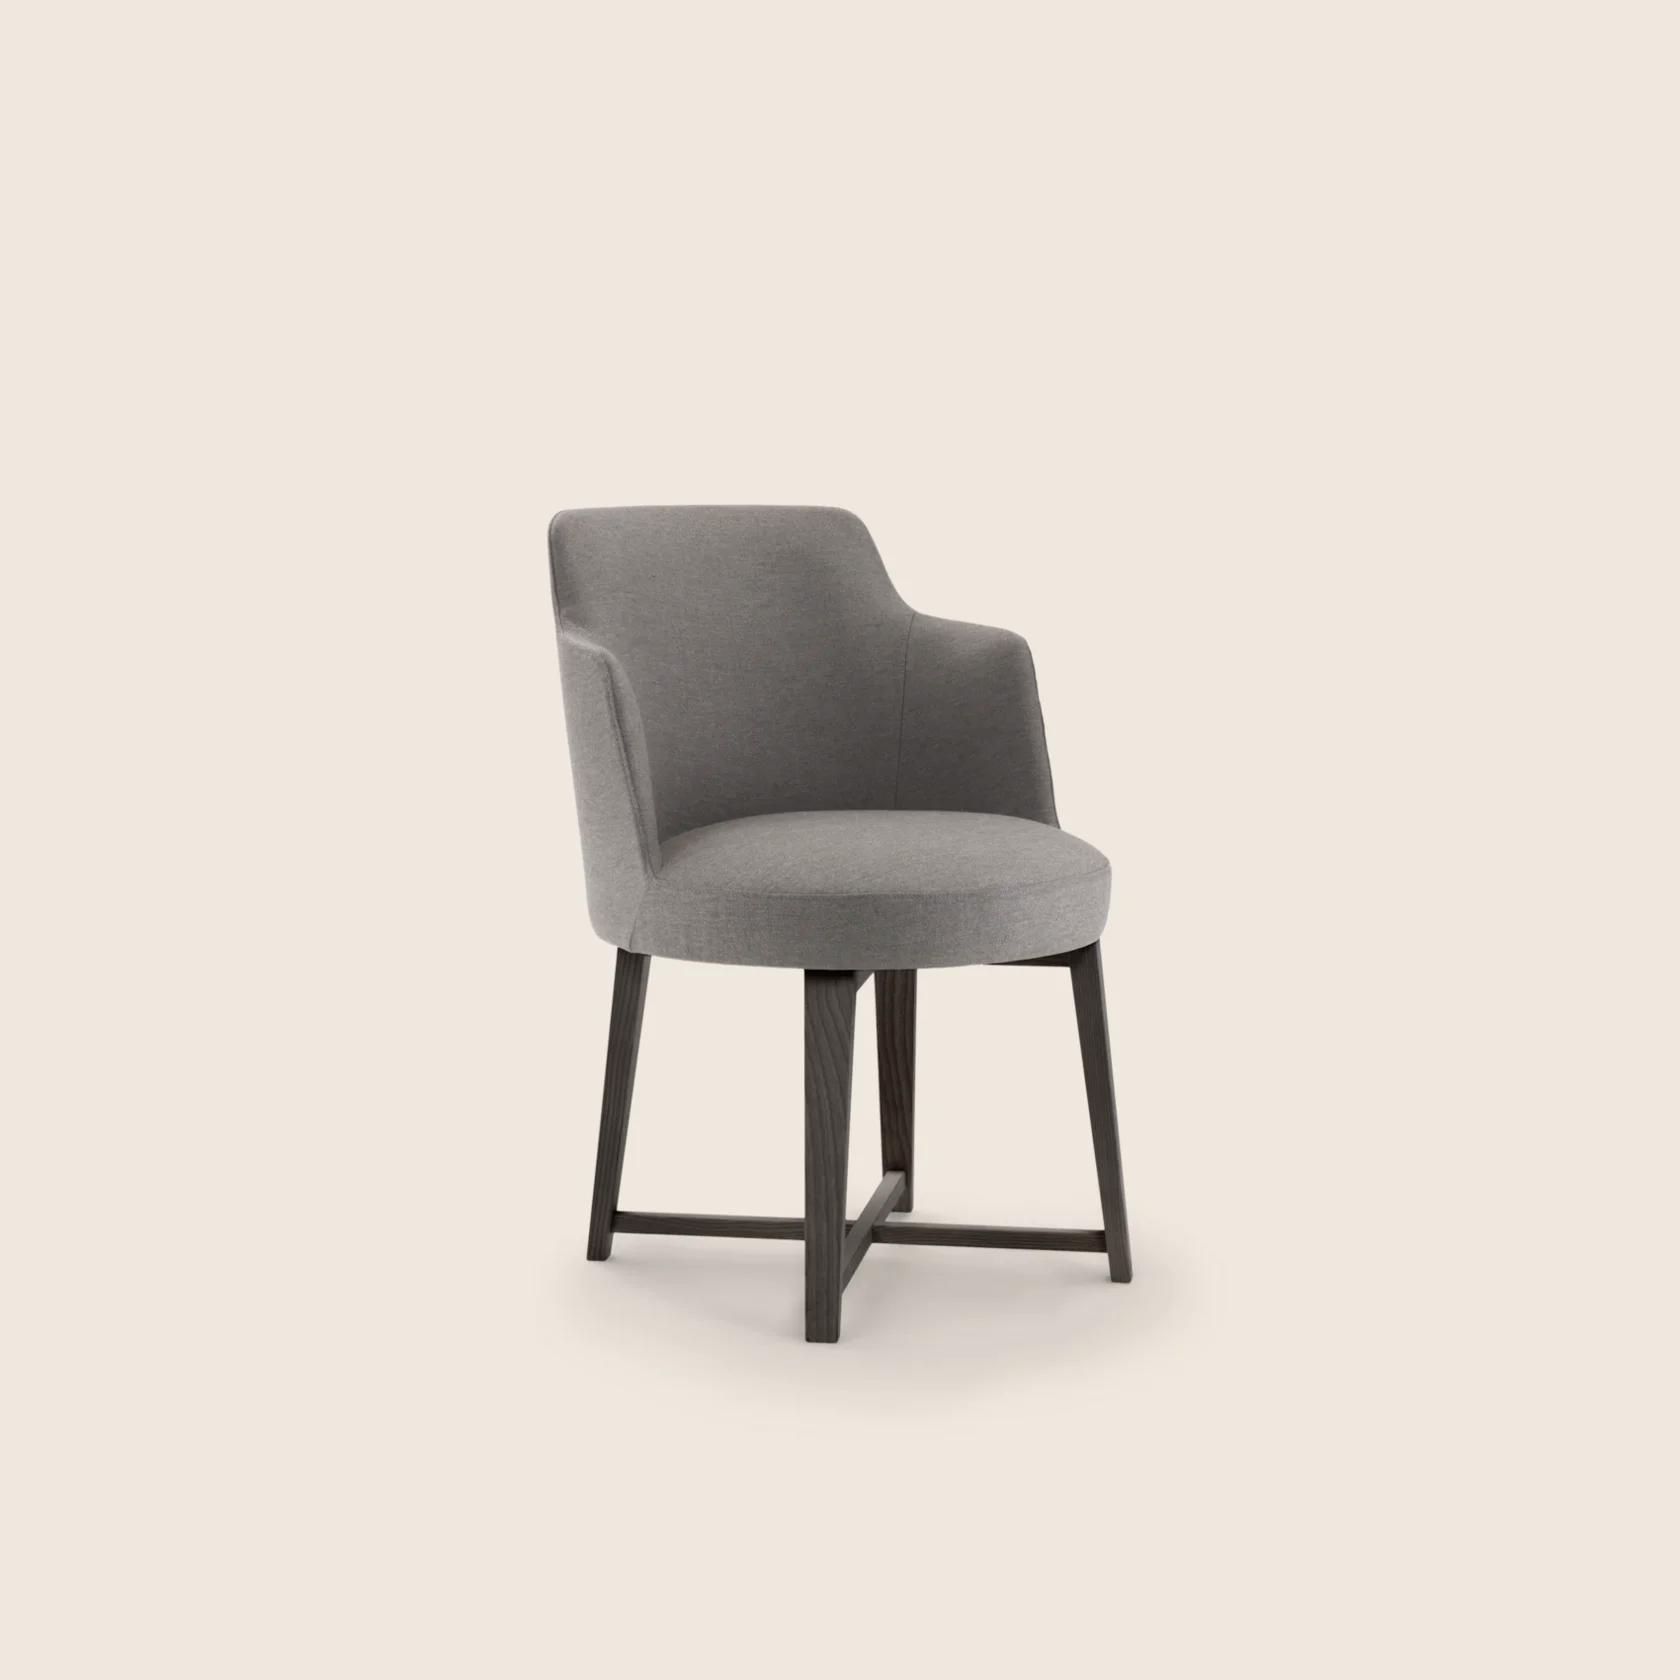 024601_HERA_CHAIR_03.png